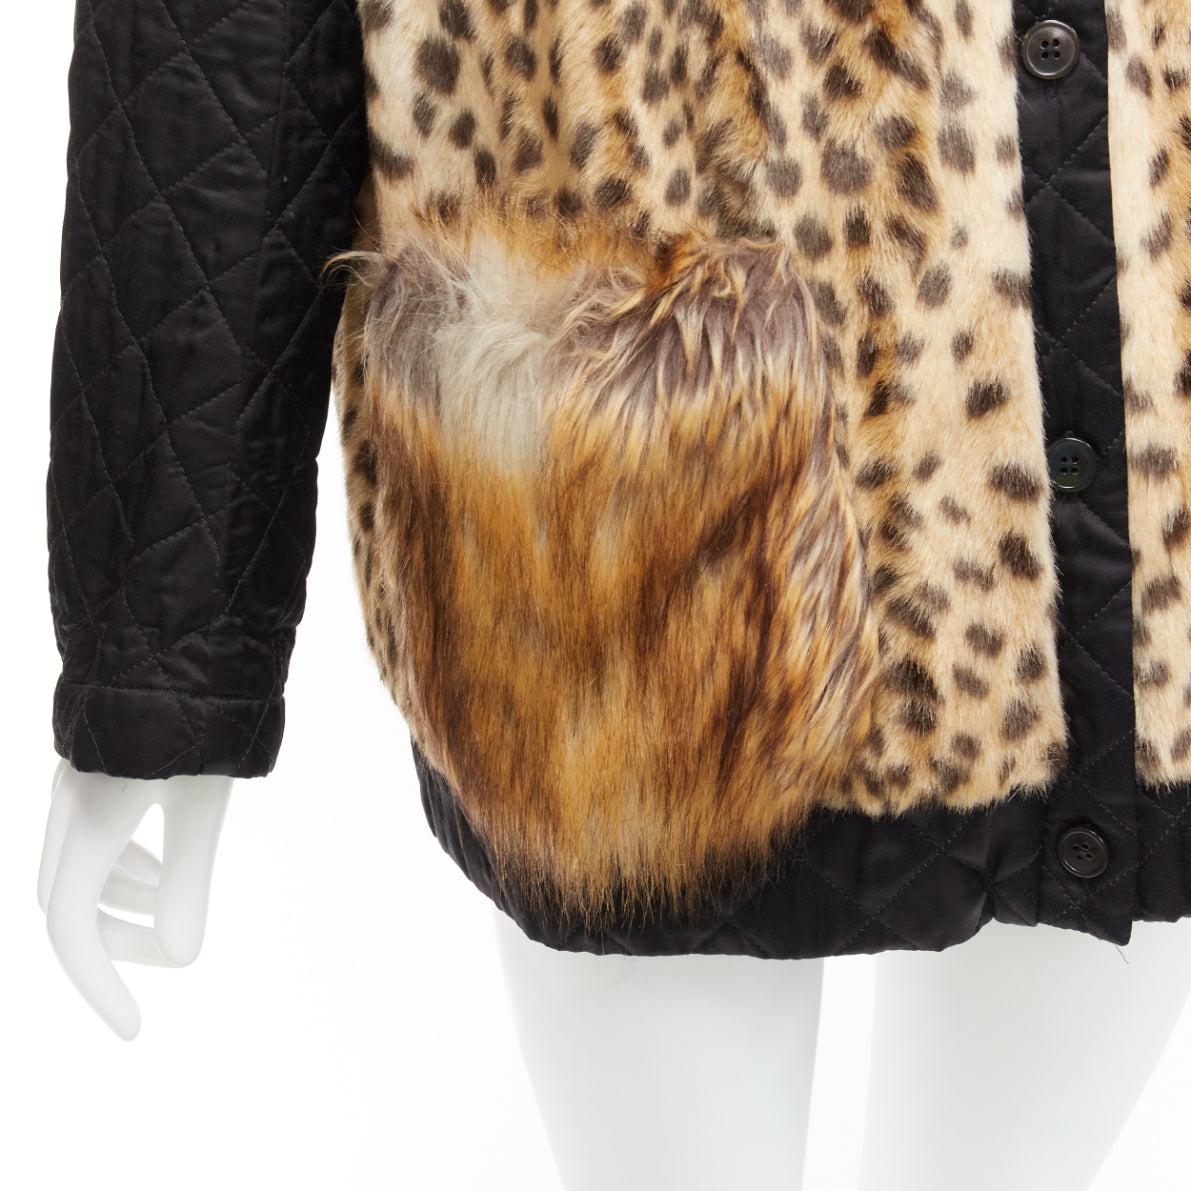 DRIES VAN NOTEN brown leopard faux fur patch pockets cardigan jacket FR38 M
Reference: DYTG/A00021
Brand: Dries Van Noten
Material: Fabric
Color: Black, Brown
Pattern: Leopard
Closure: Button
Lining: Black Fabric
Extra Details: Quilted sleeves.
Made